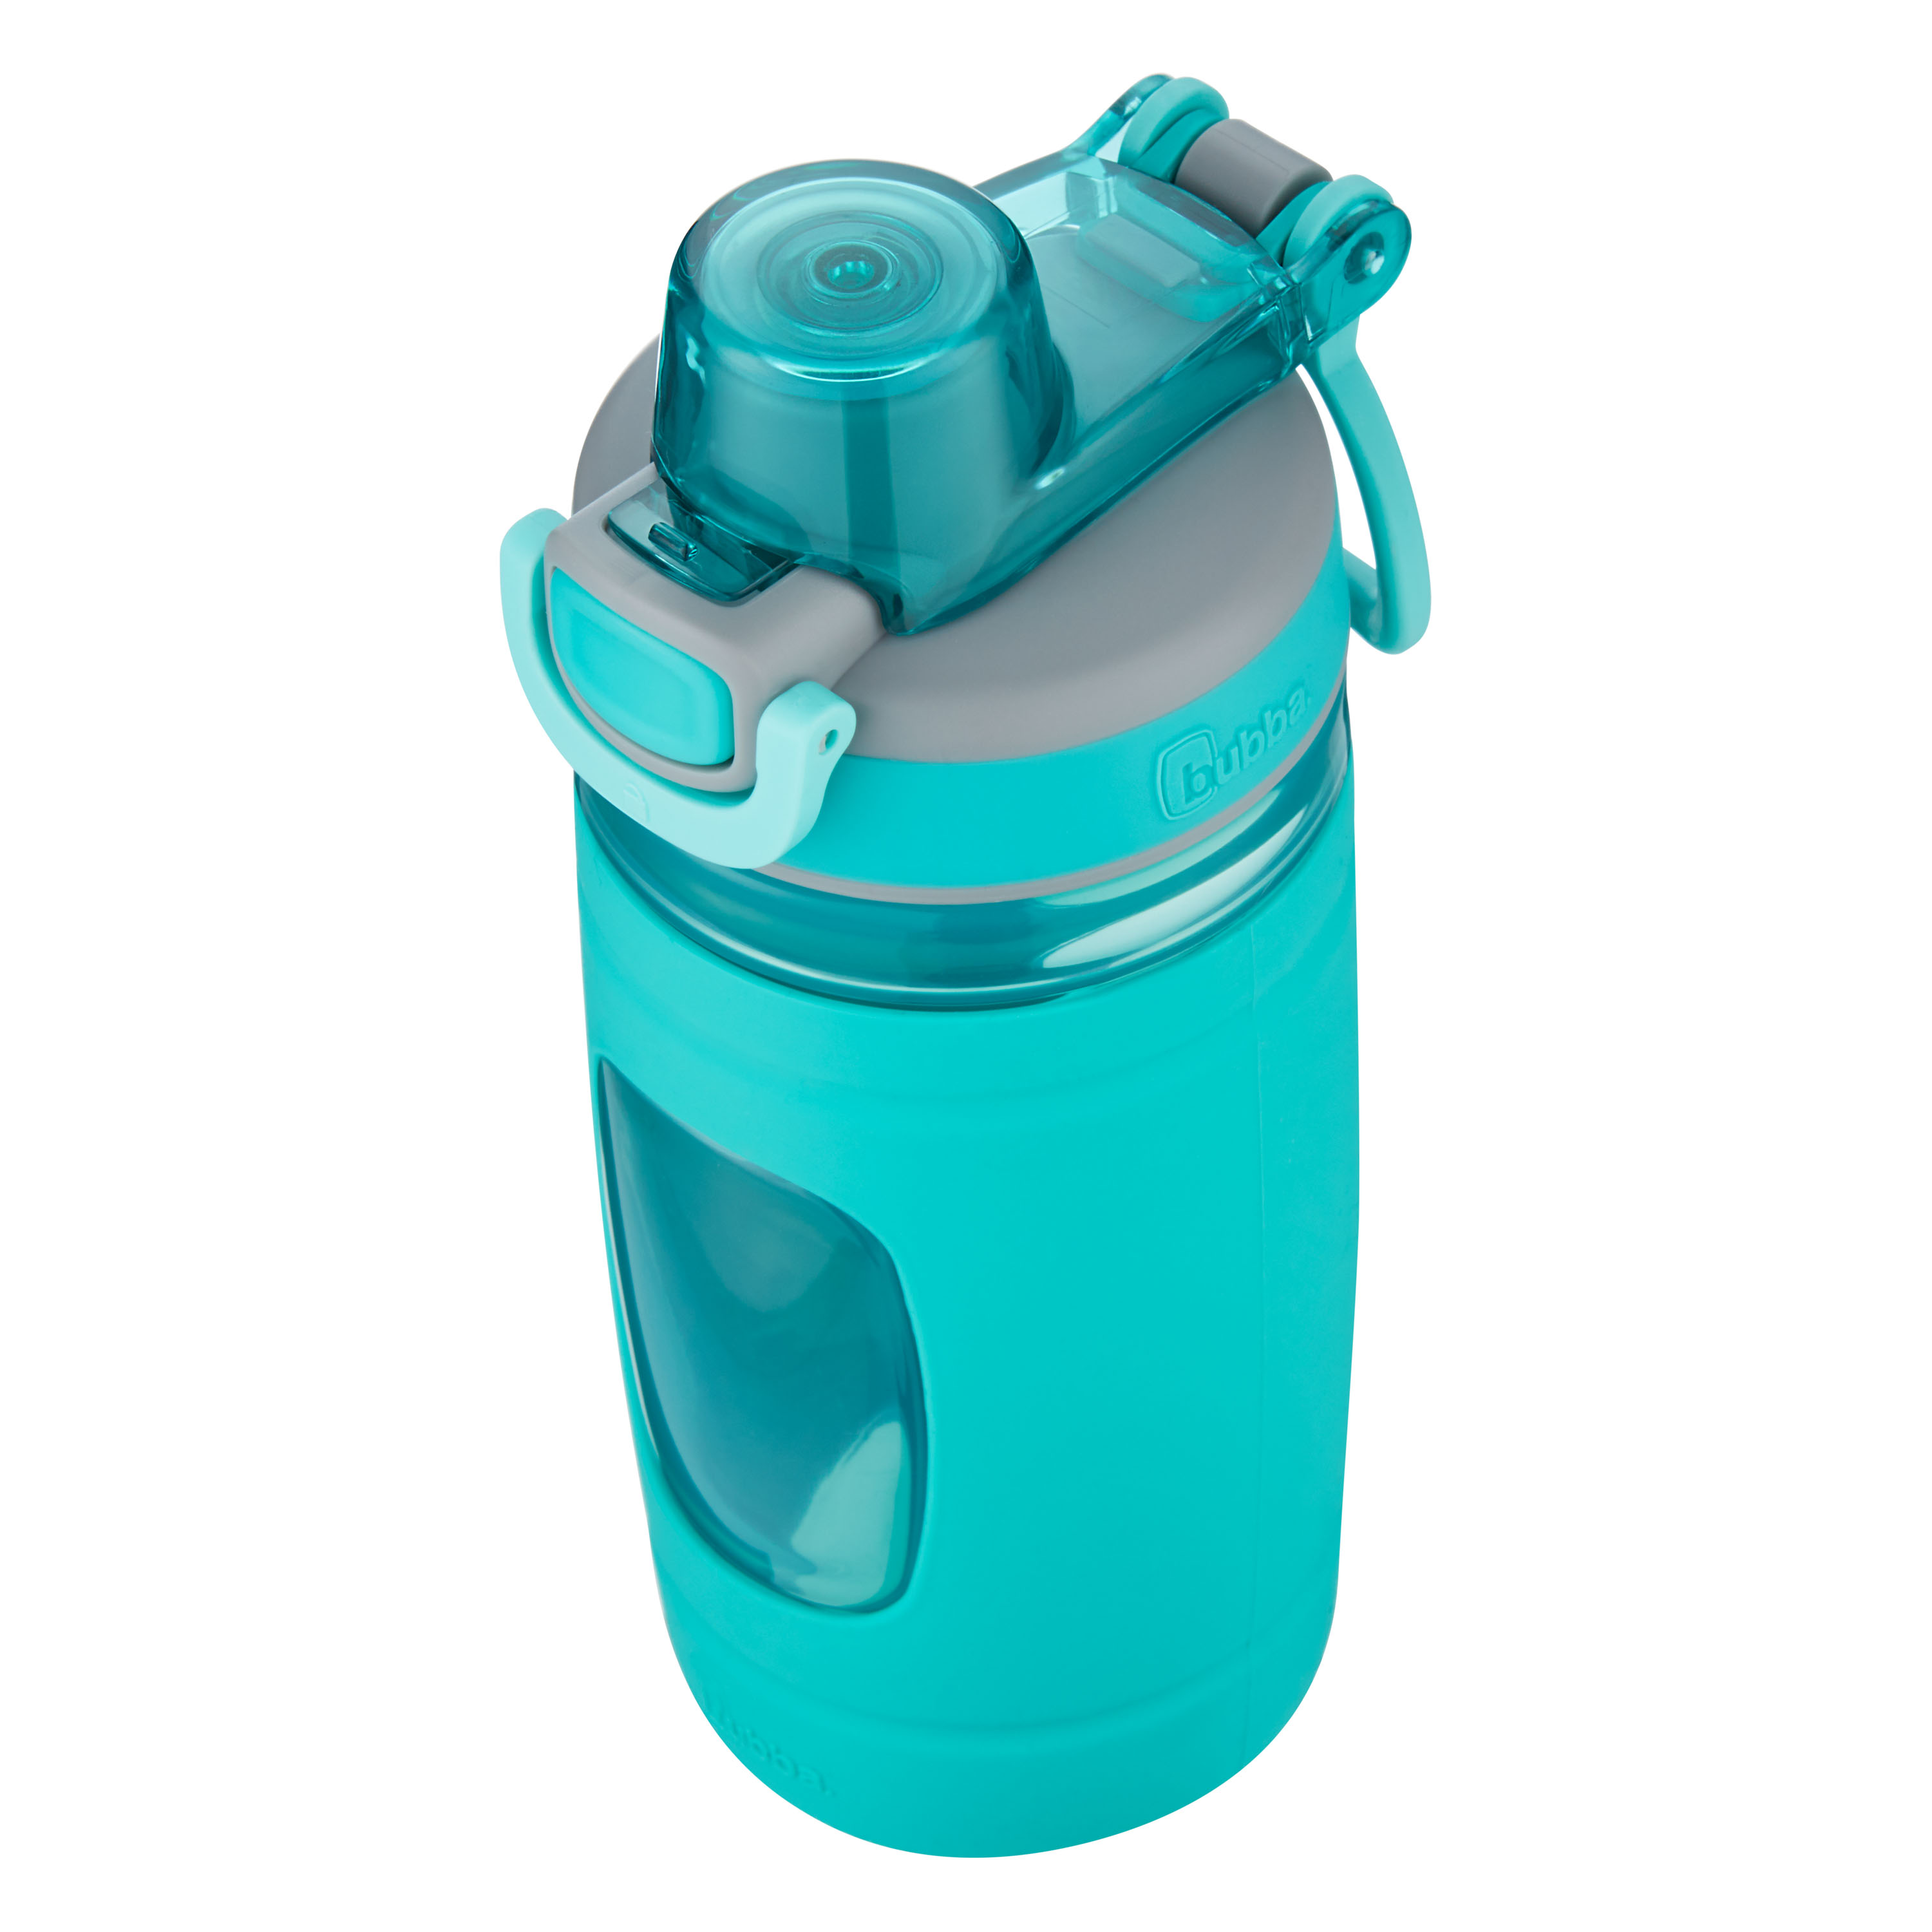 Bubba Flo Kids 16 oz Aqua and Gray Plastic Water Bottle with Wide Mouth Lid - image 6 of 6